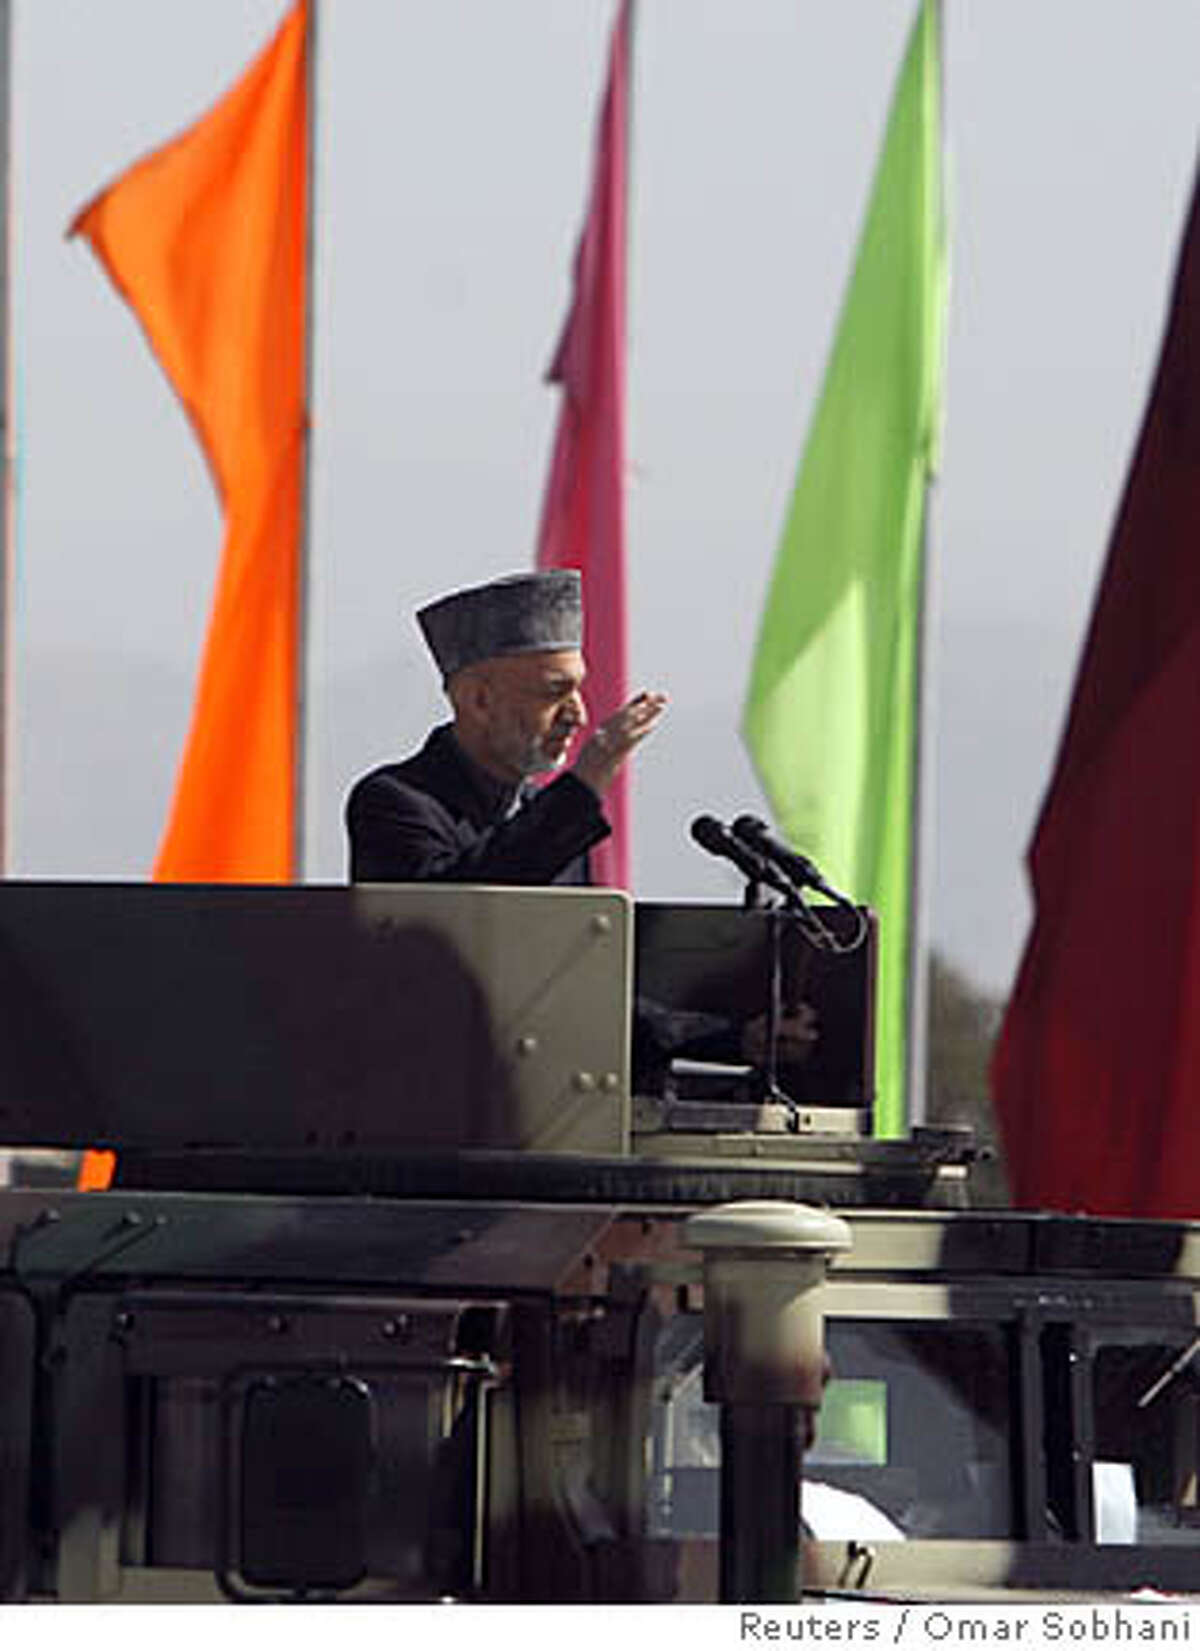 Afghan President Hamid Karzai salutes moments before an assassination attempt during a celebration in Kabul April 27,2008. Karzai escaped unhurt after an assassination attempt by Taliban fighters with guns and rockets during an official celebration in the capital, Kabul, on Sunday. REUTERS/Omar Sobhani (AFGHANISTAN)